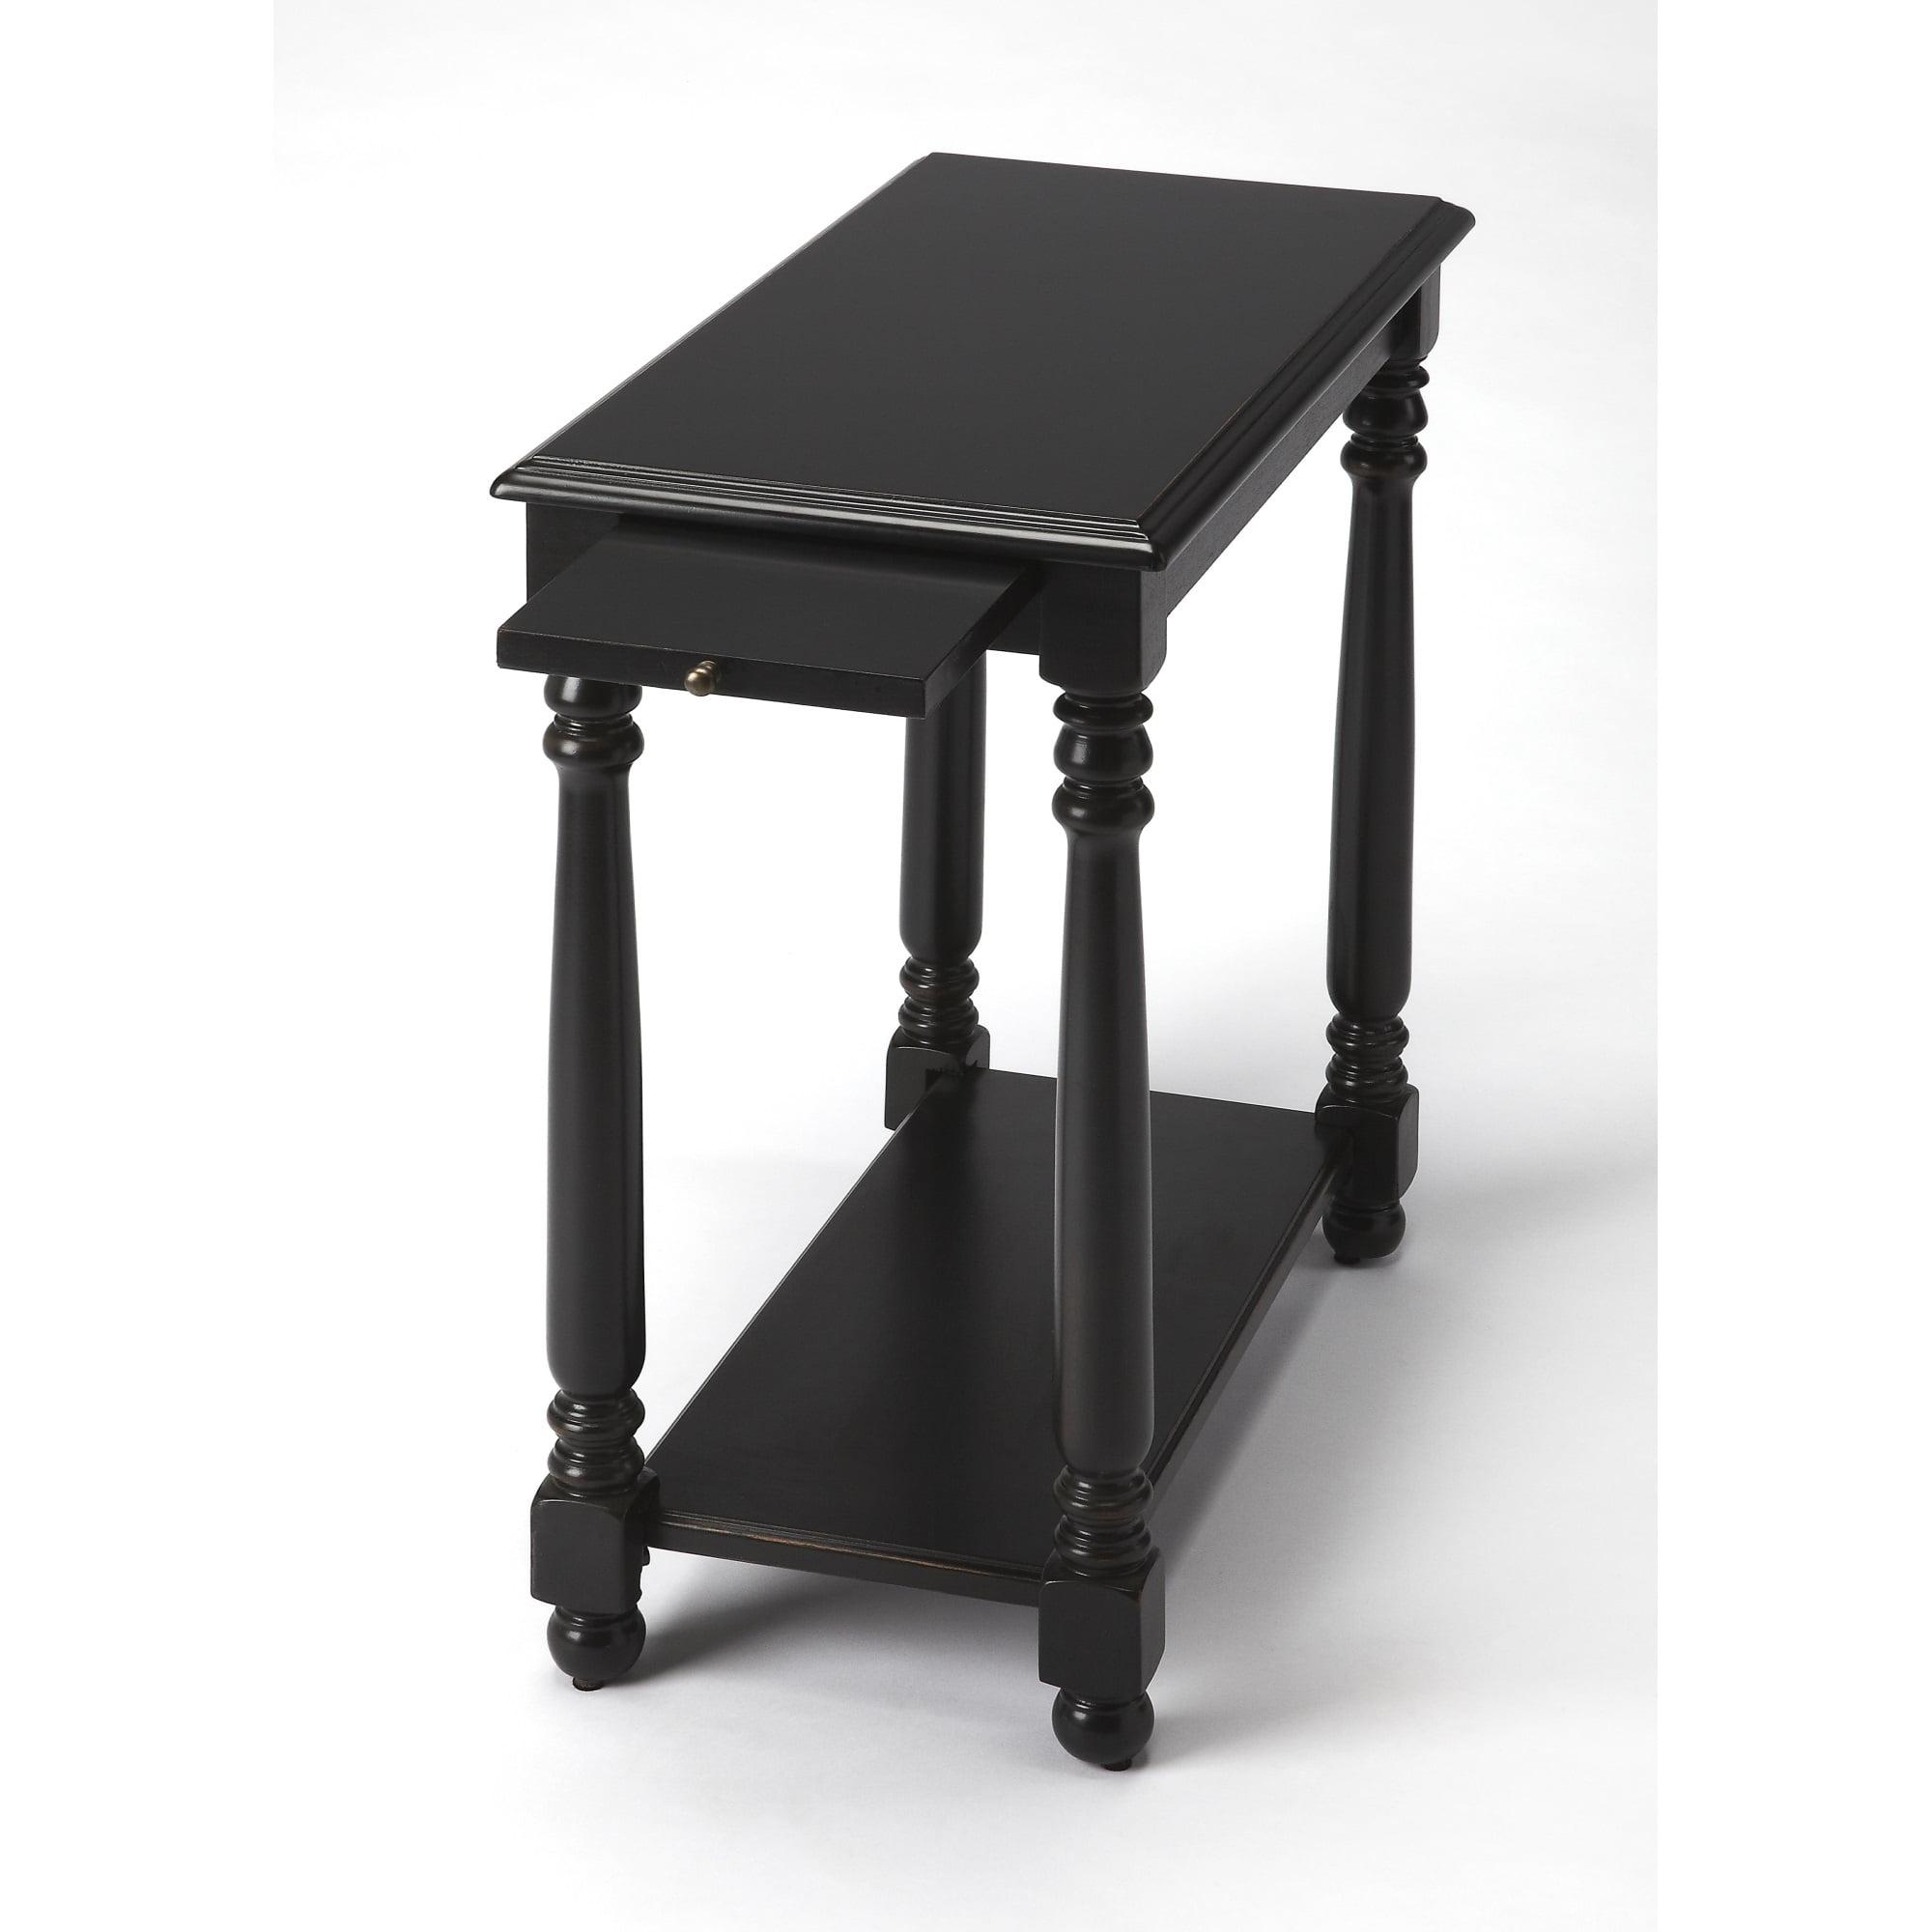 Devane Black Licorice Chairside Table with Pullout Shelf